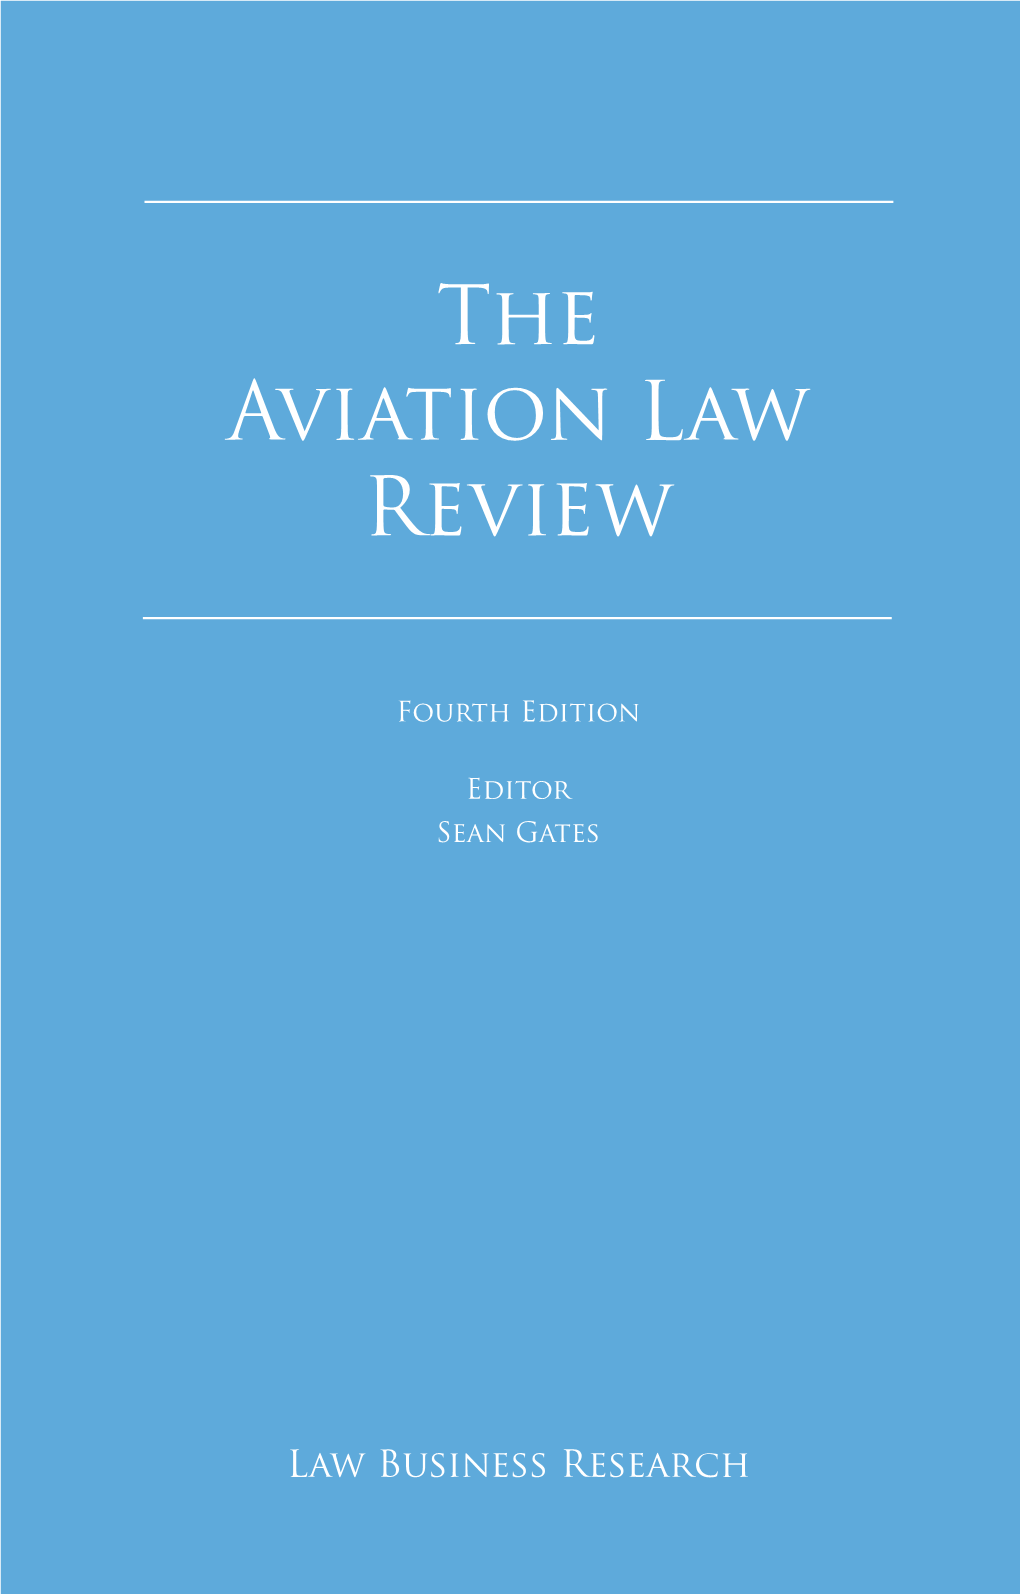 The Aviation Law Review